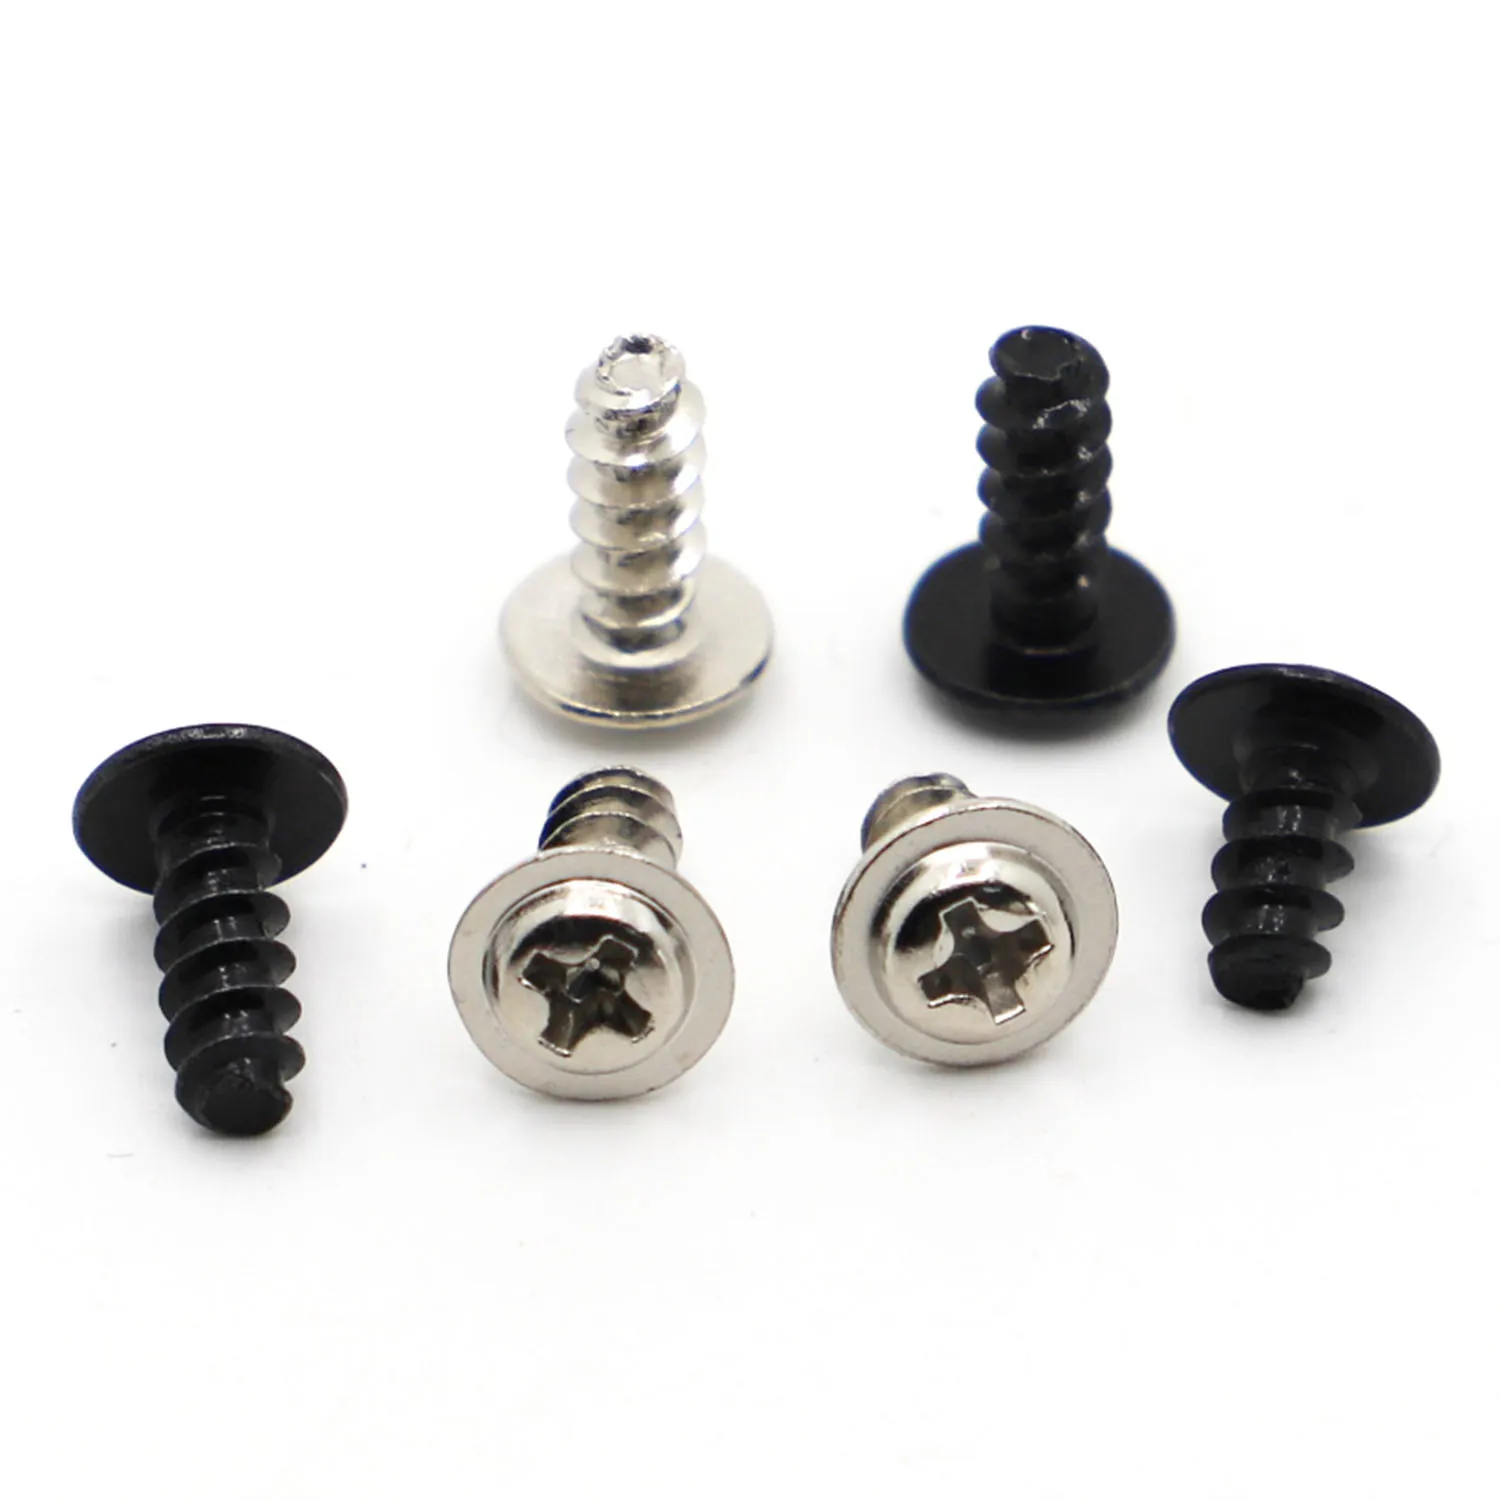 

Black Round Head Flat End Screw M1.4 M1.7 M2 M2.3 M2.6 M3 M4 PWB Nickel Plated Phillips Flat Tail Self Tapping Screw With Pad